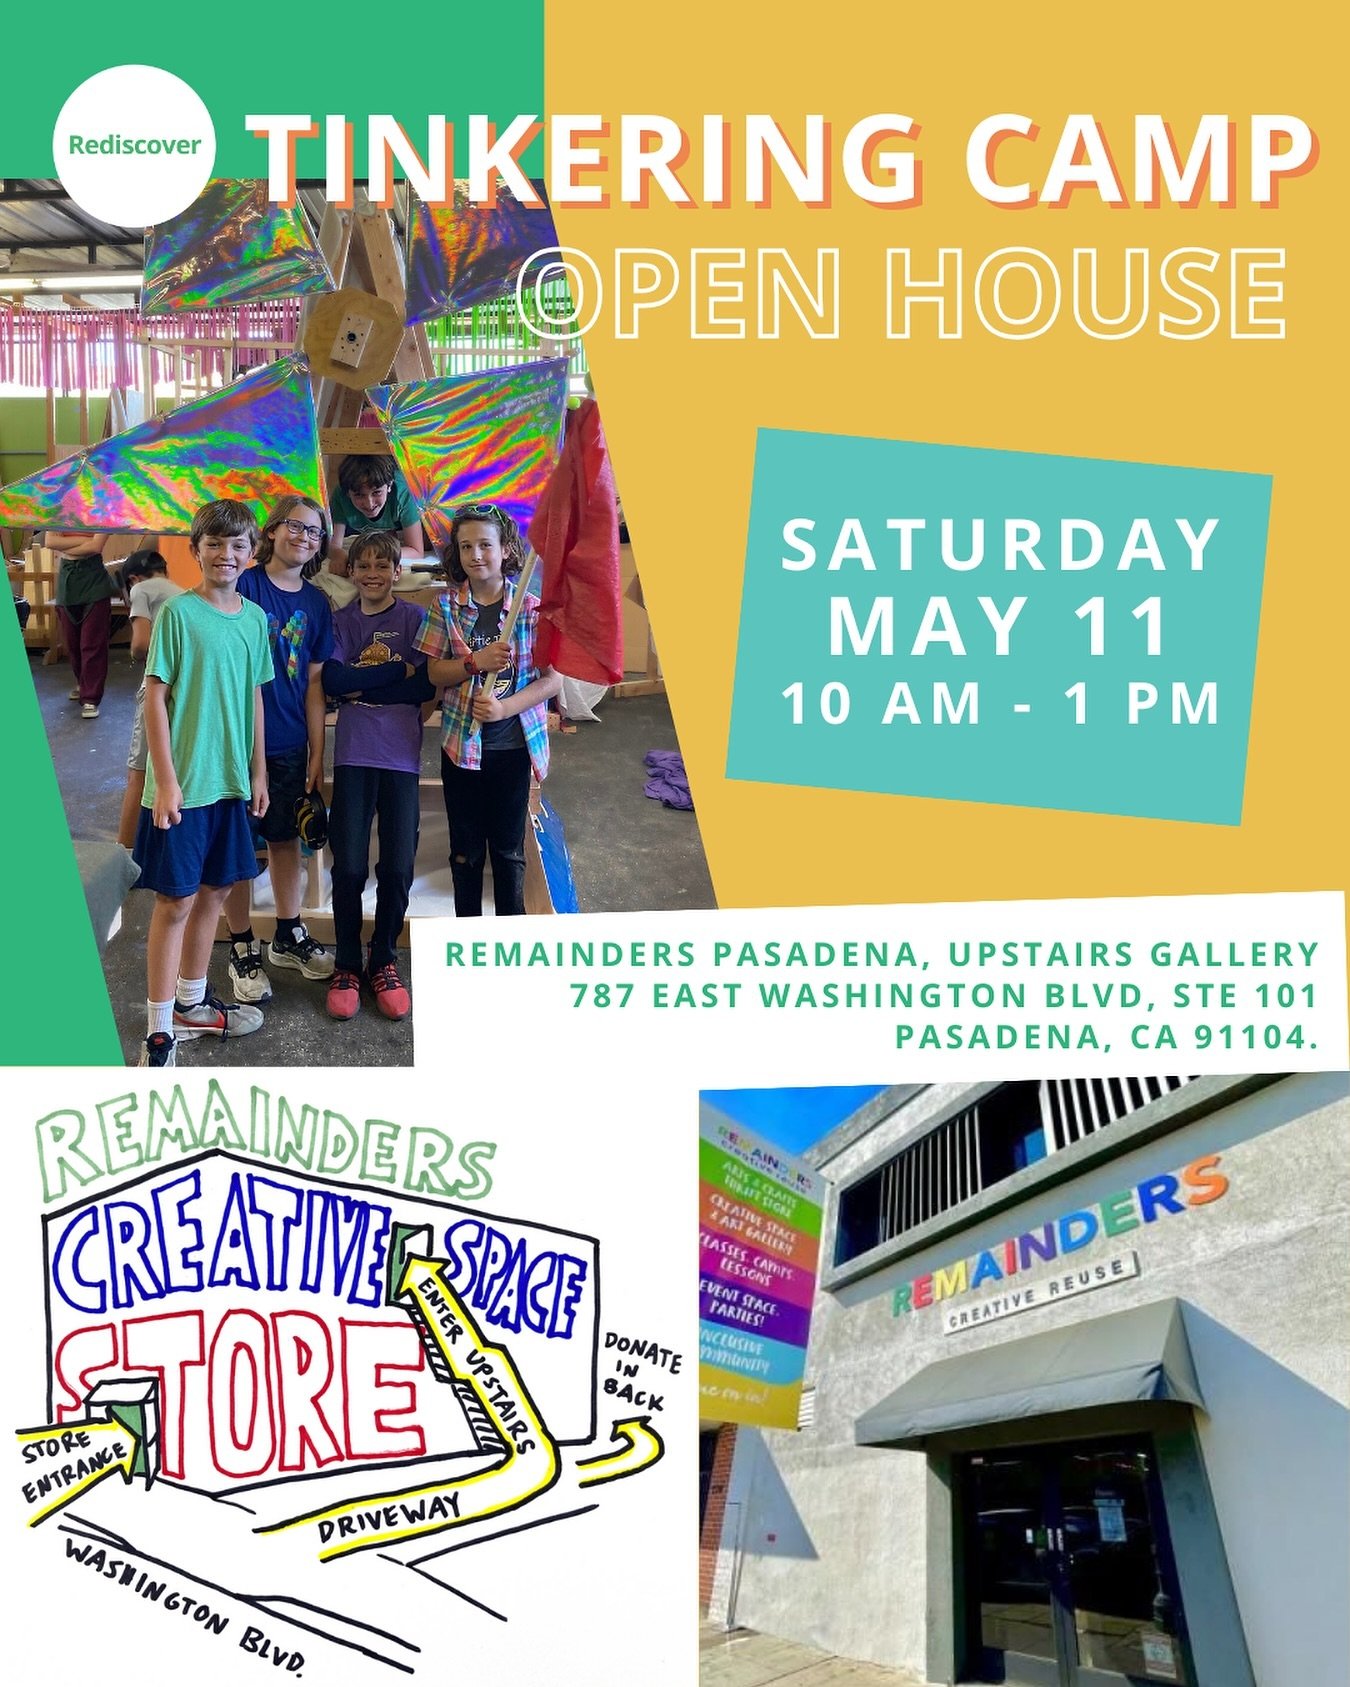 Come visit us 5/11 for our TINKERING CAMP OPEN HOUSE with @rediscoverctr ! We&rsquo;re so excited to show you what the camp is all about! Hope to see you this summer! Sign up at rediscovercenter.org
&bull; &bull; &bull;
#tinkeringcamp #summercamp #re